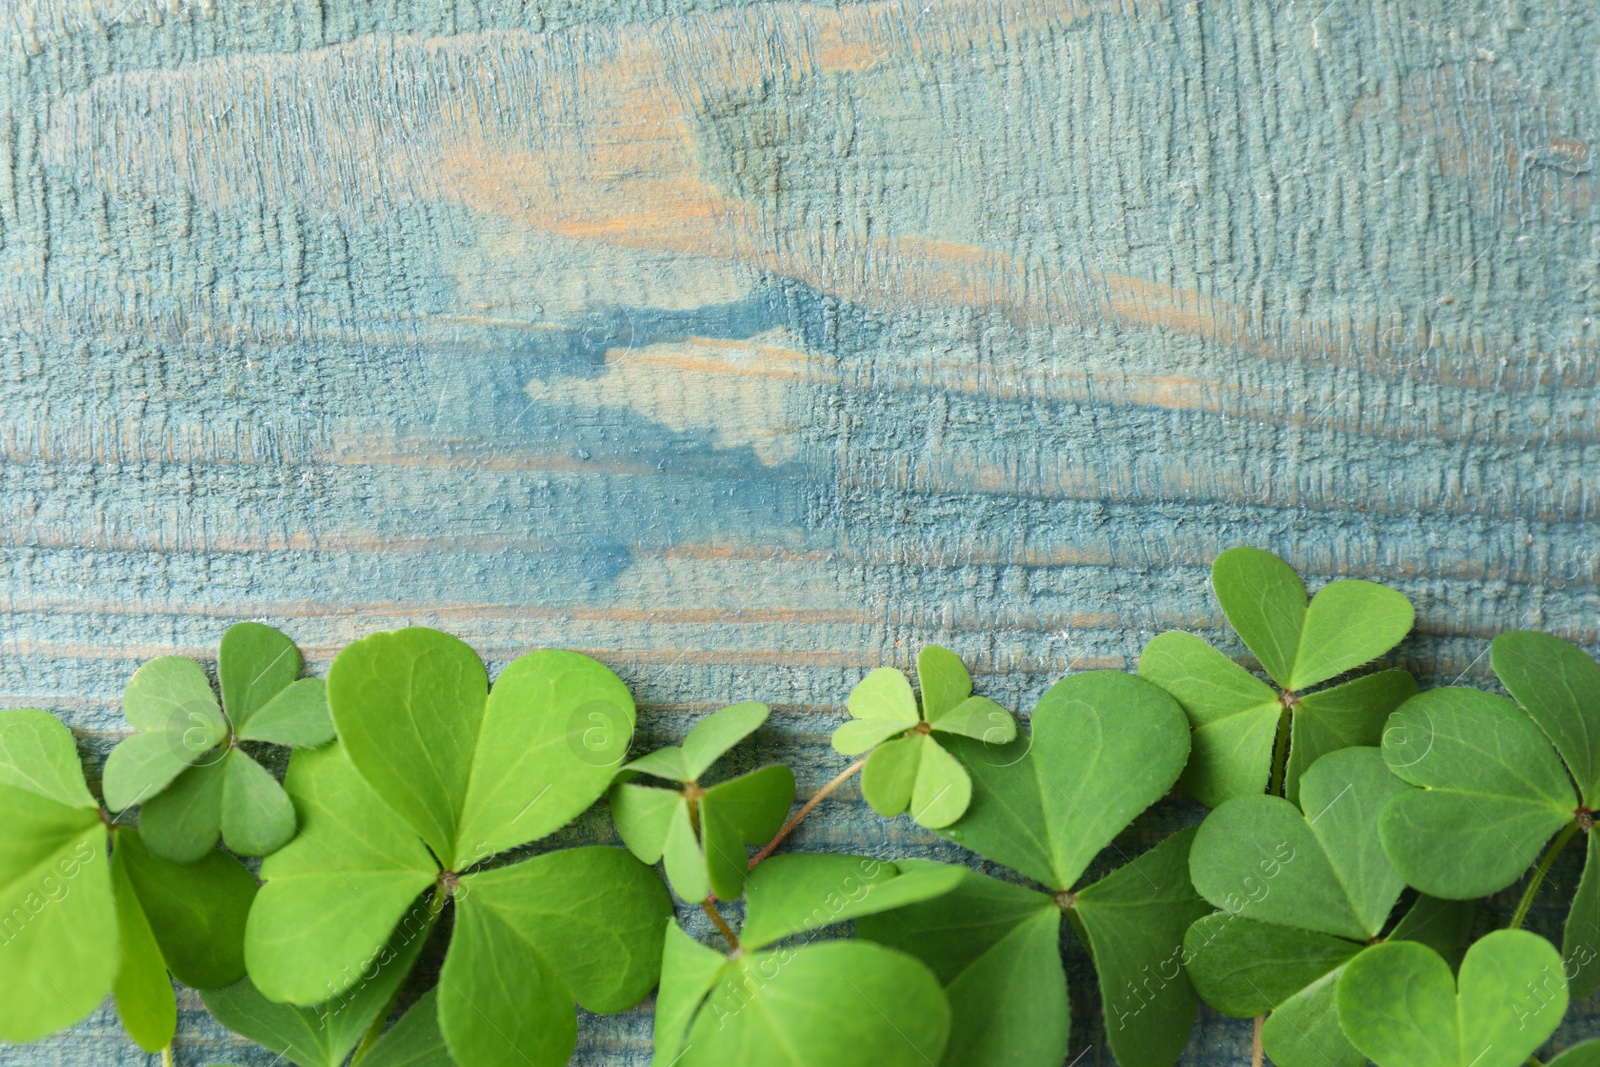 Photo of Clover leaves on blue wooden table, flat lay with space for text. St. Patrick's Day symbol